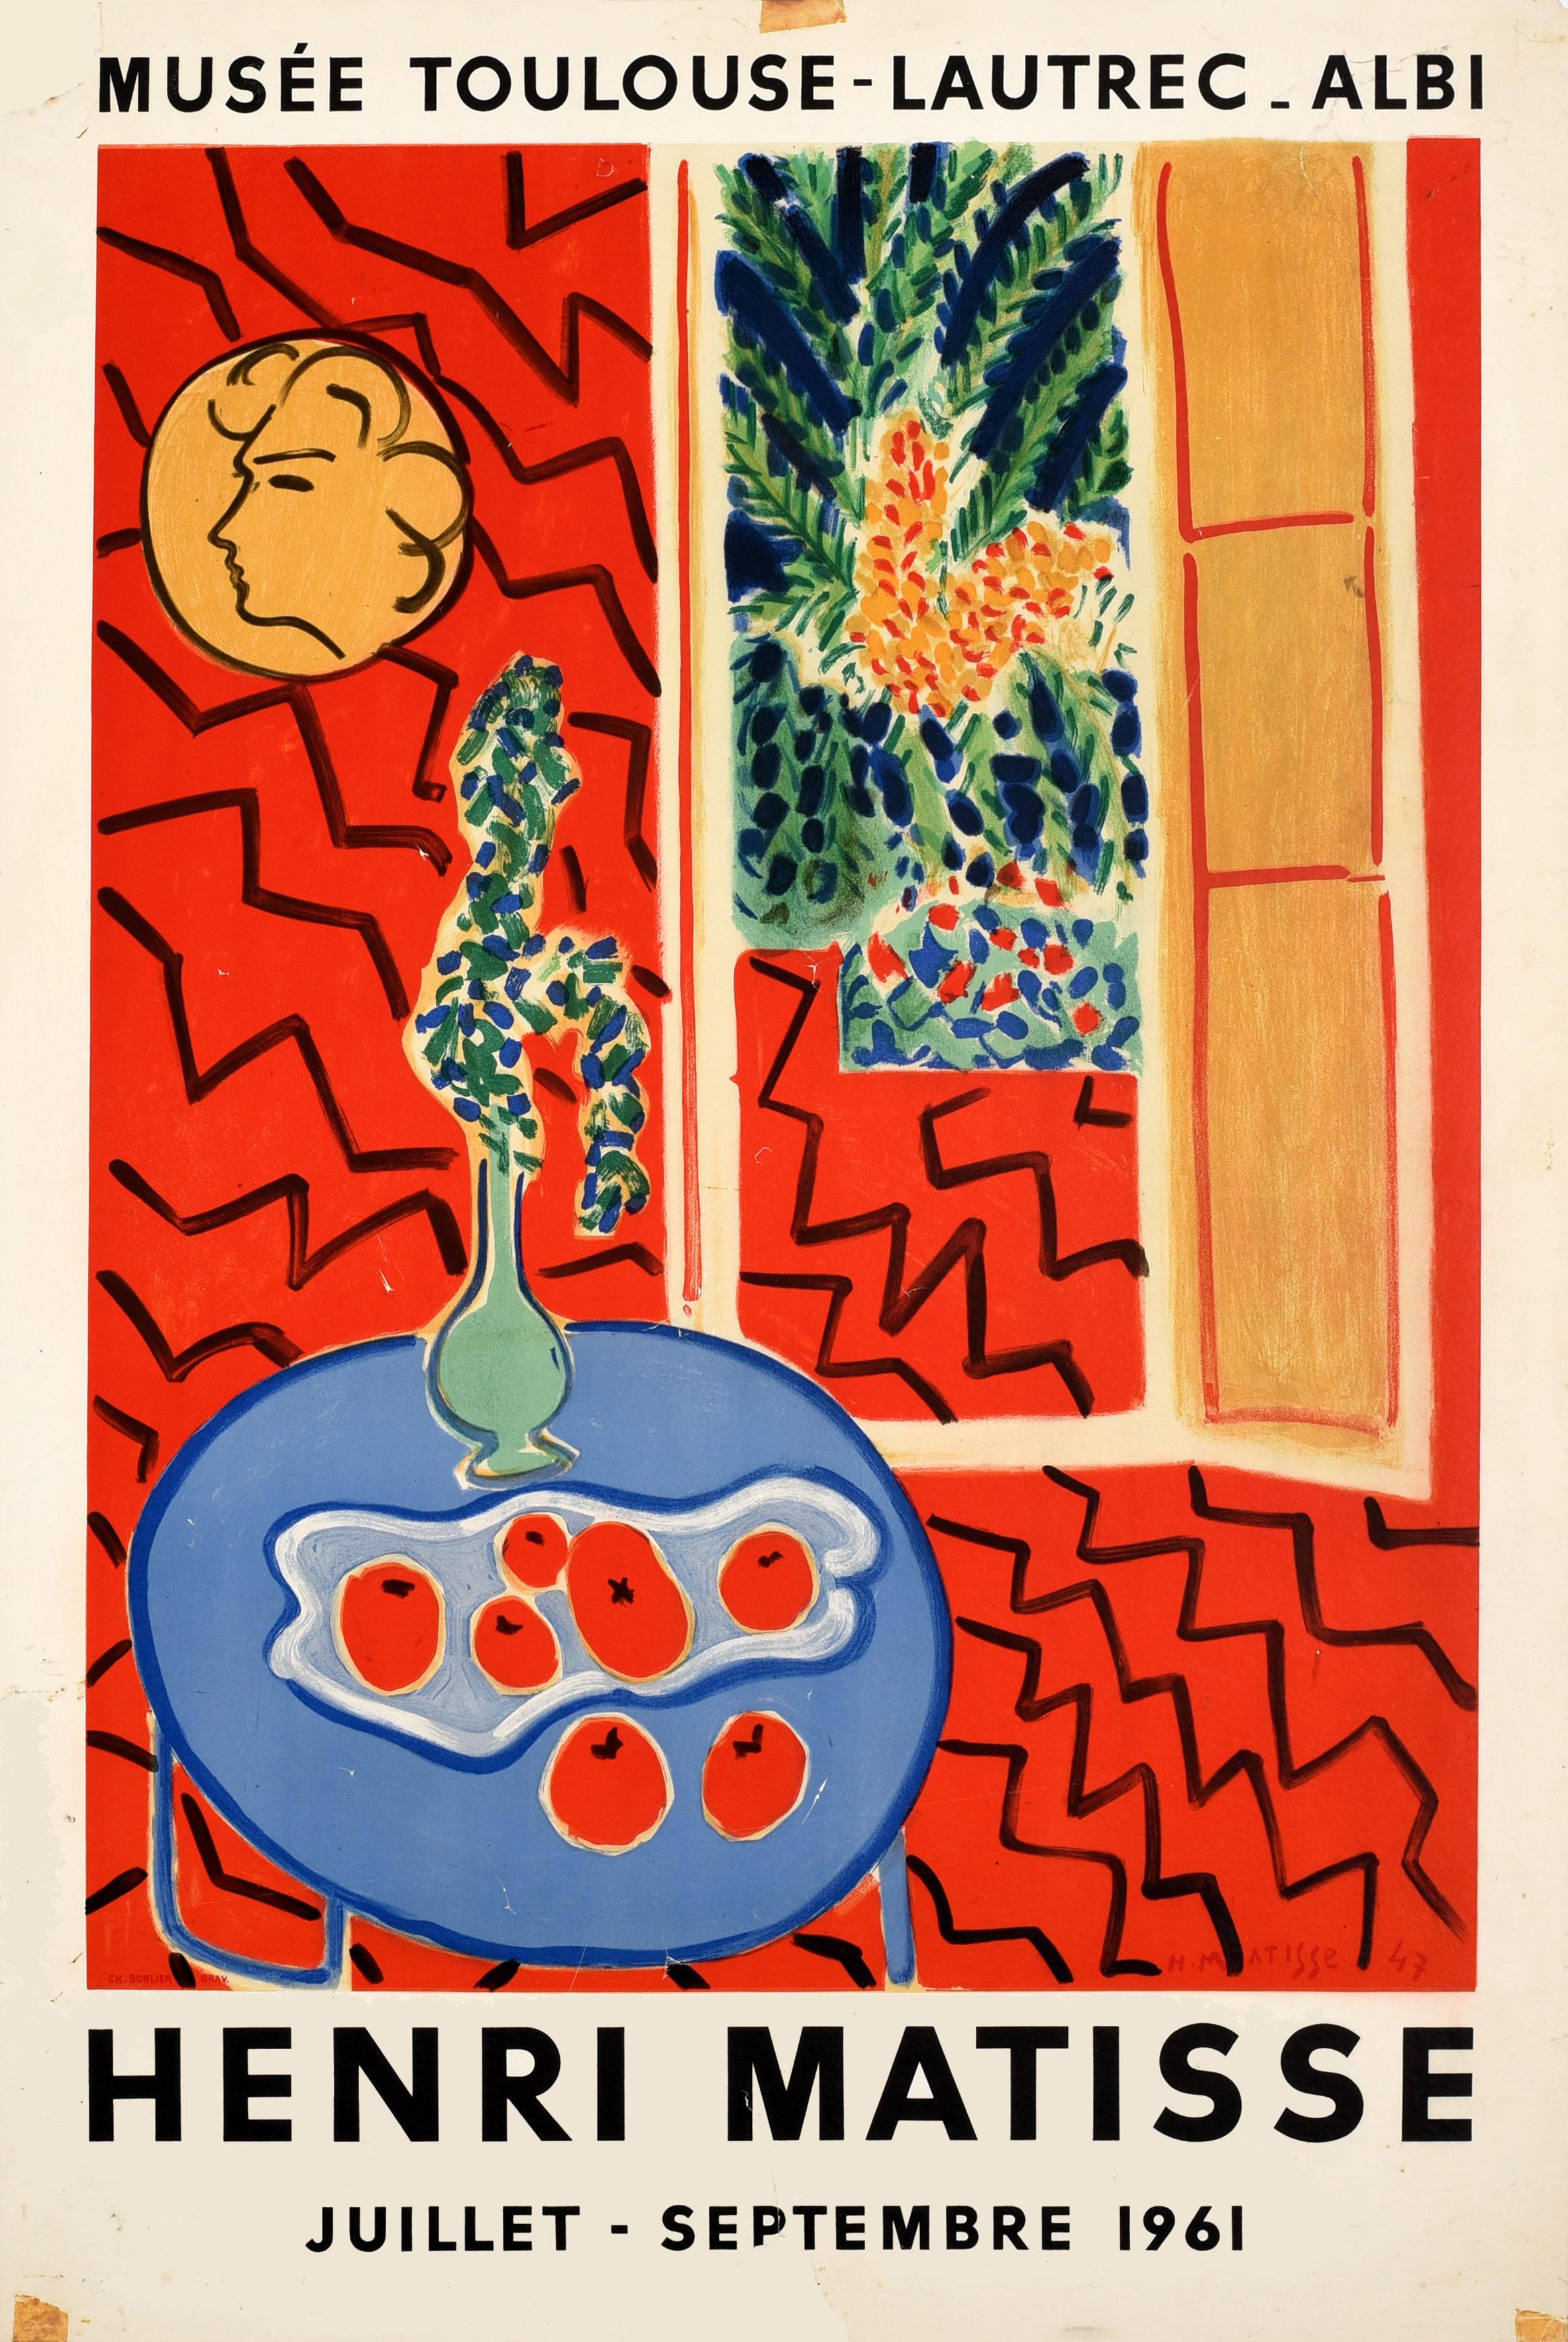 Original vintage art exhibition poster featuring a colourful design by the renowned French artist Henri Matisse (1869-1954) from his 1947 artwork Interieur Rouge Nature Morte sur Table Bleue / Red Interior Still Life on a Blue Table depicting a vase